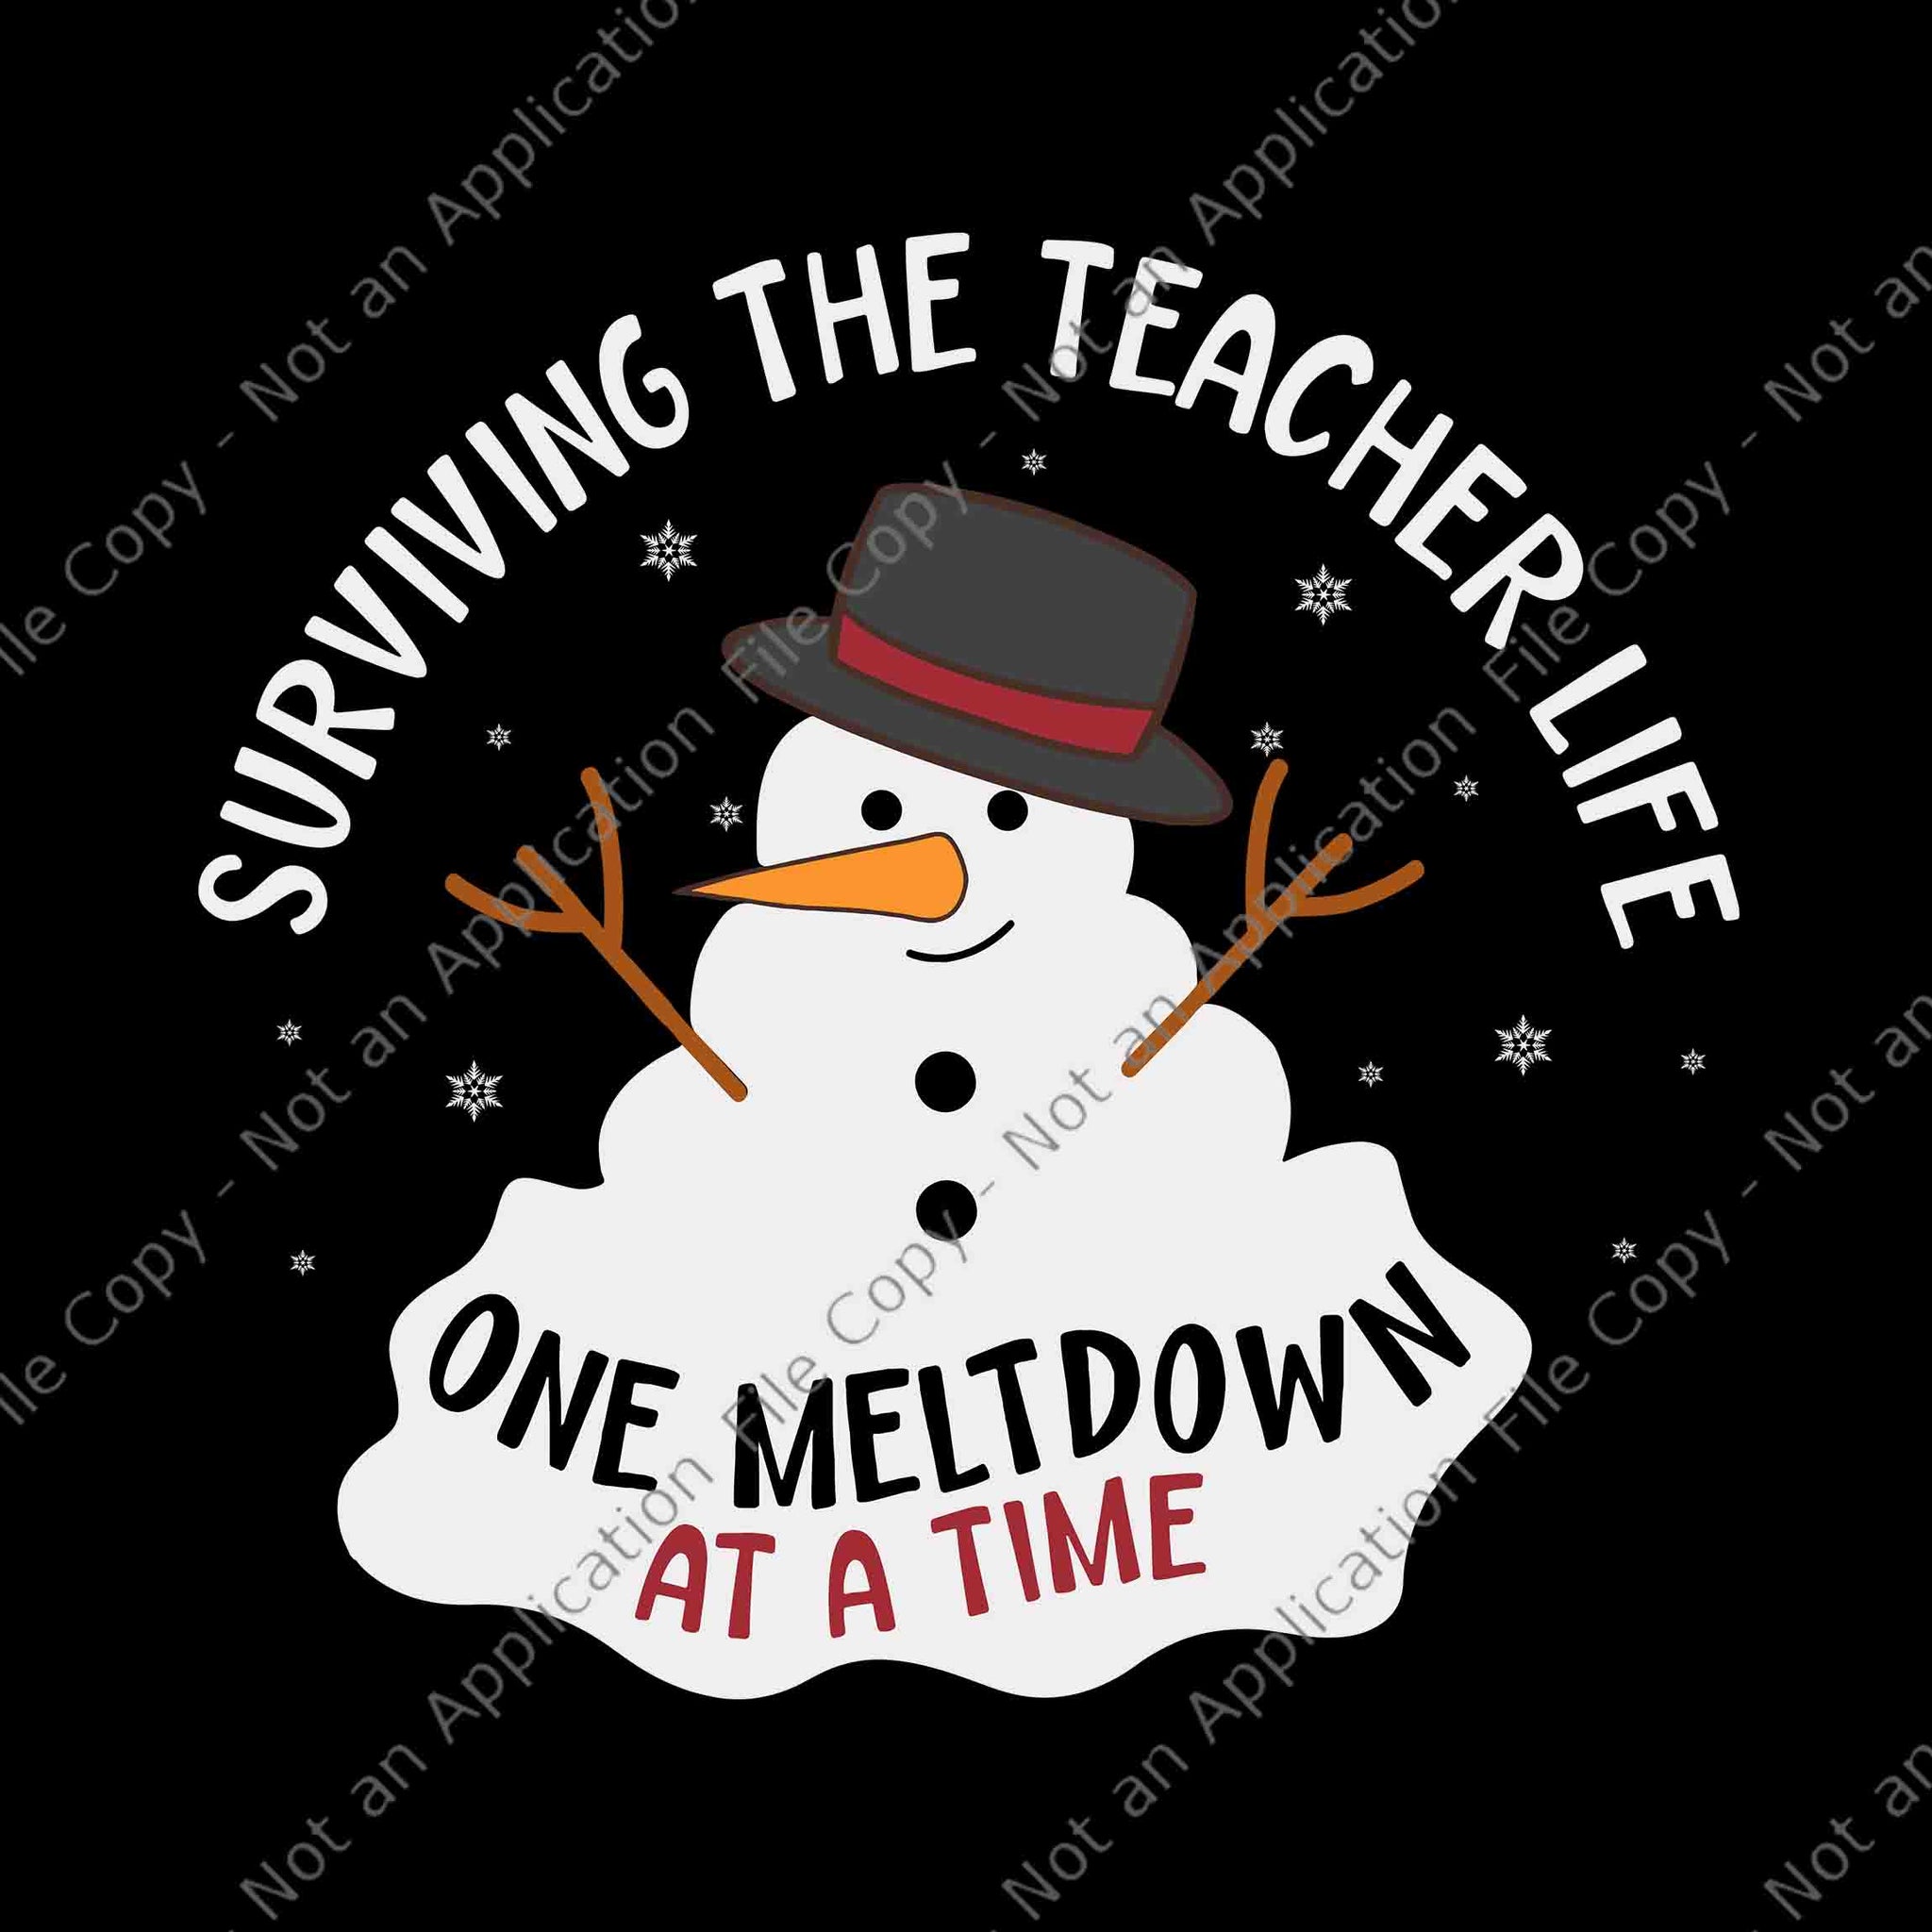 Surviving The Teacher Life One Meltdown At a Time Christmas Svg, Snowman Christmas Svg, Snowman Svg, Christmas Svg